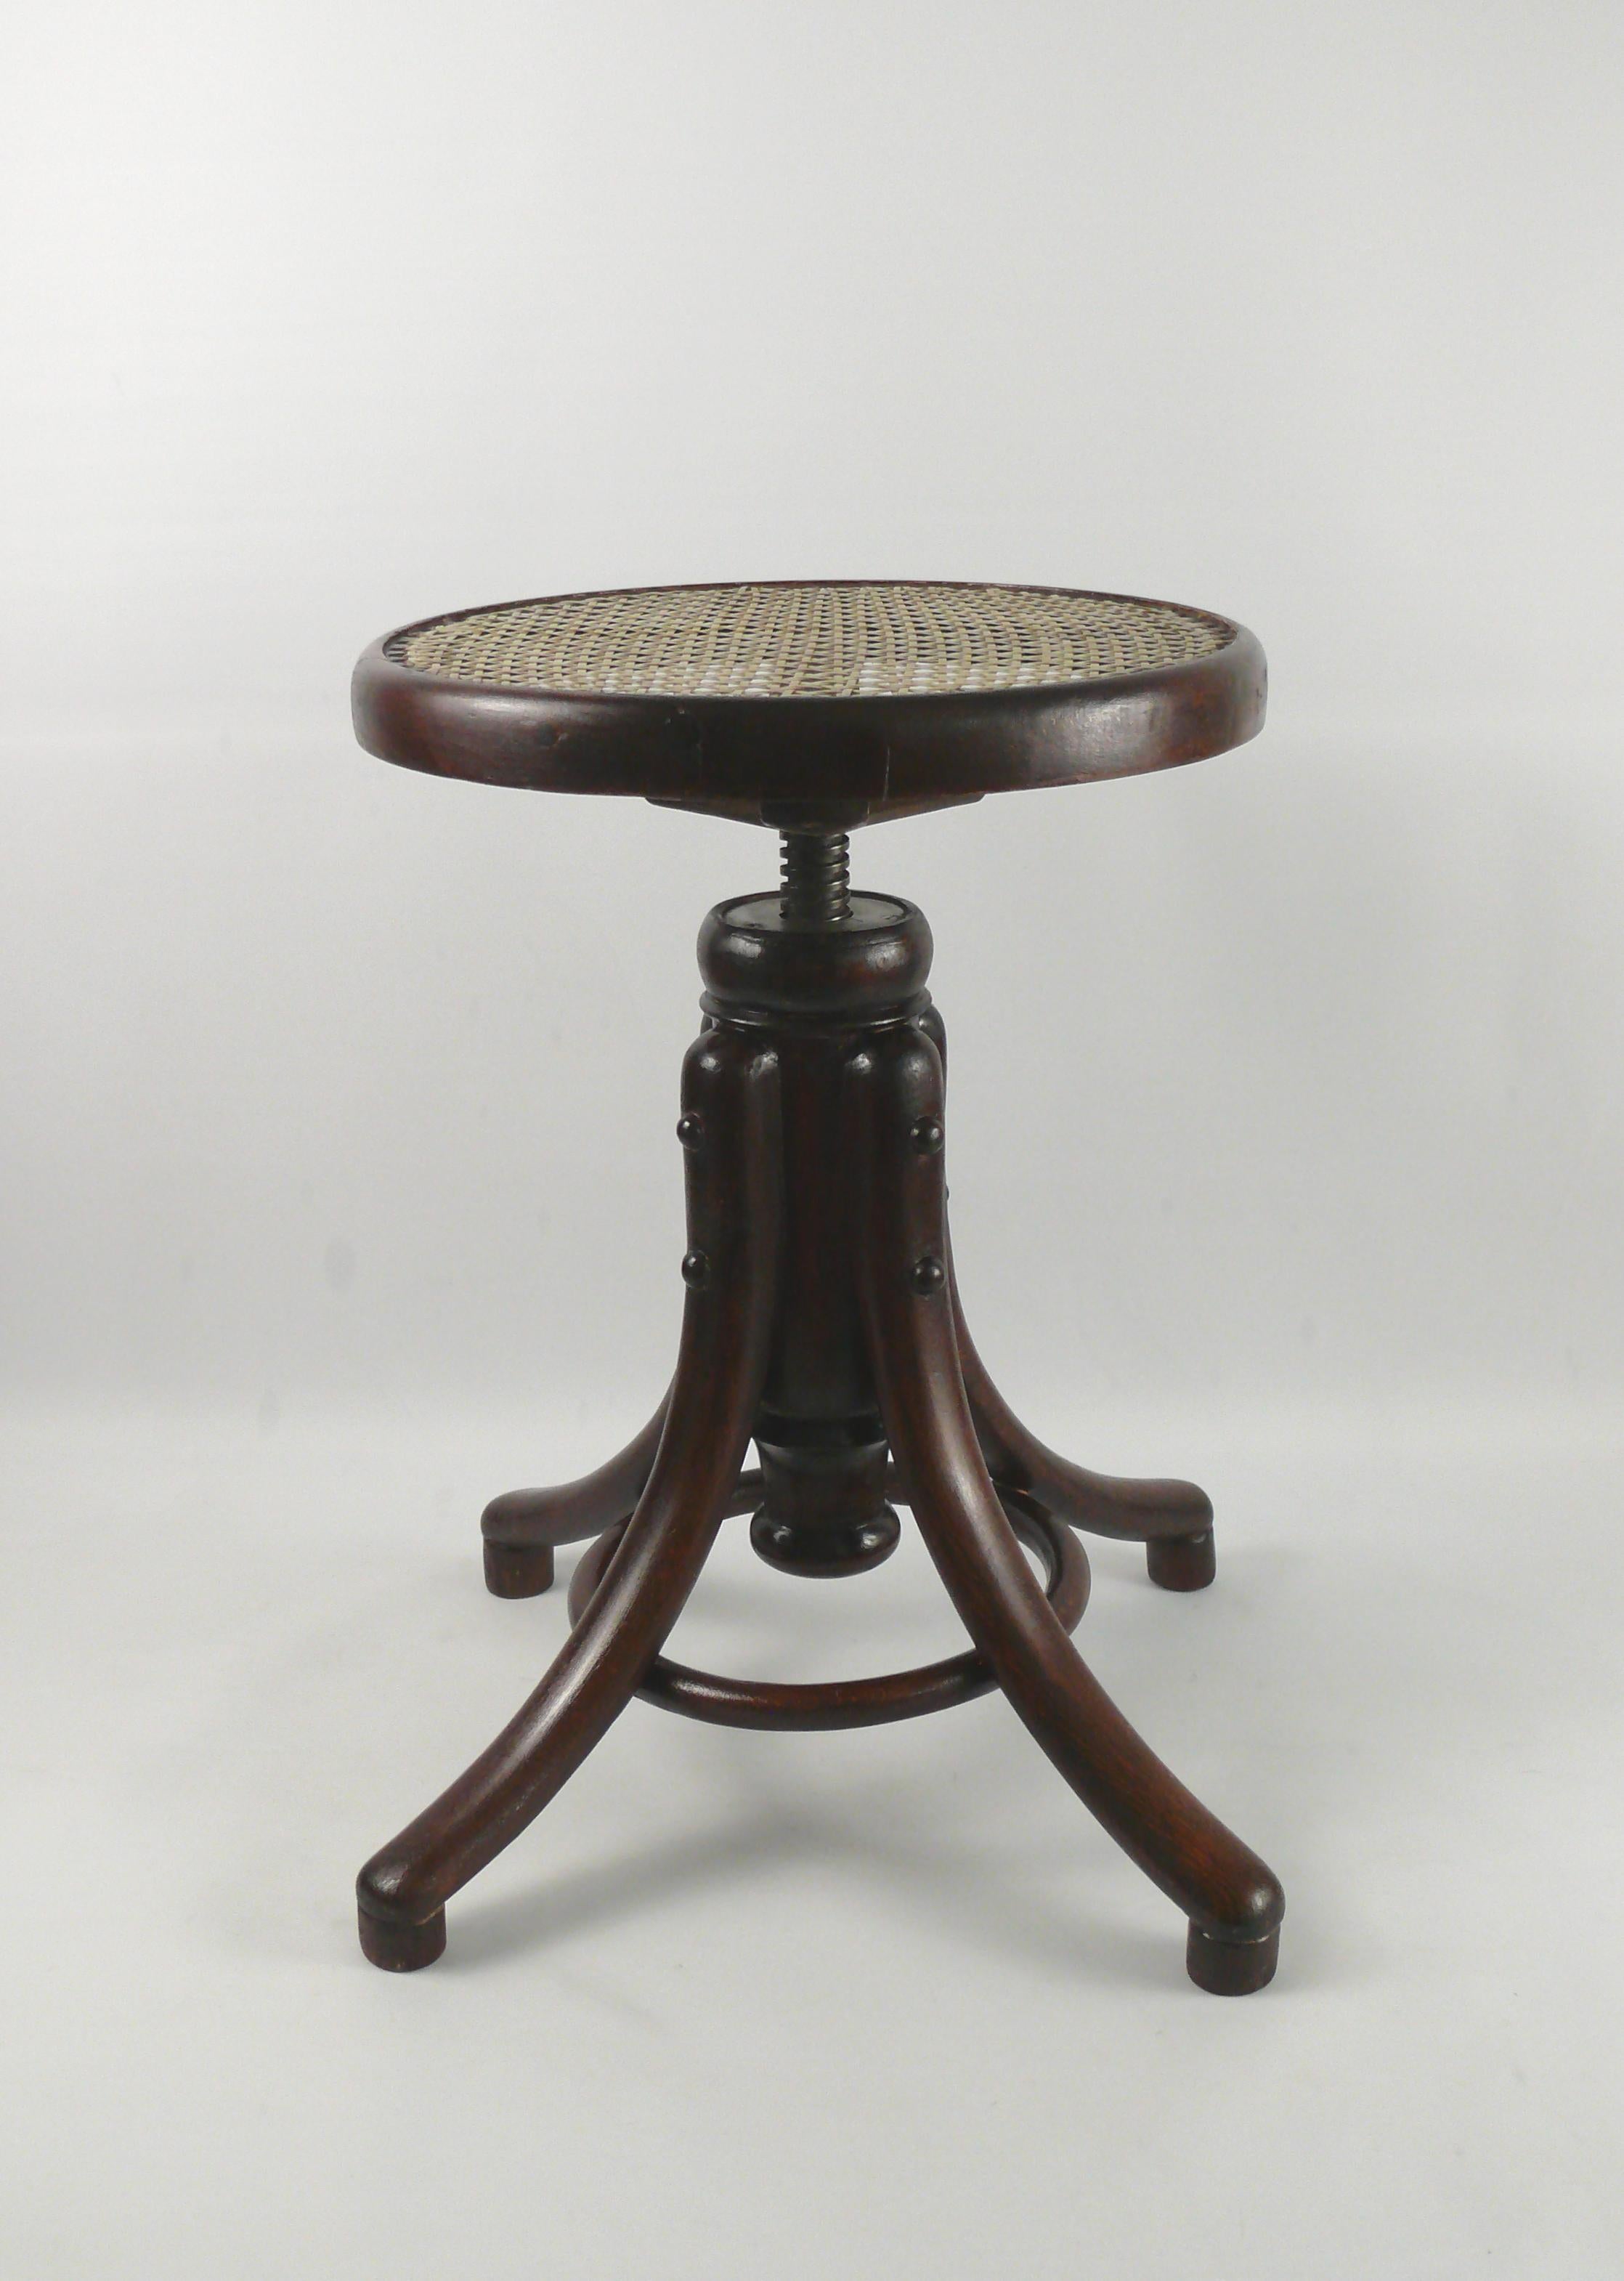 Refurbished piano stool from the end of the 19th or beginning of the 20th century - without manufacturer's certificate, high quality, similar to Thonet. The piano stool is made of solid beech wood and has a frame with a bentwood ring. The curved